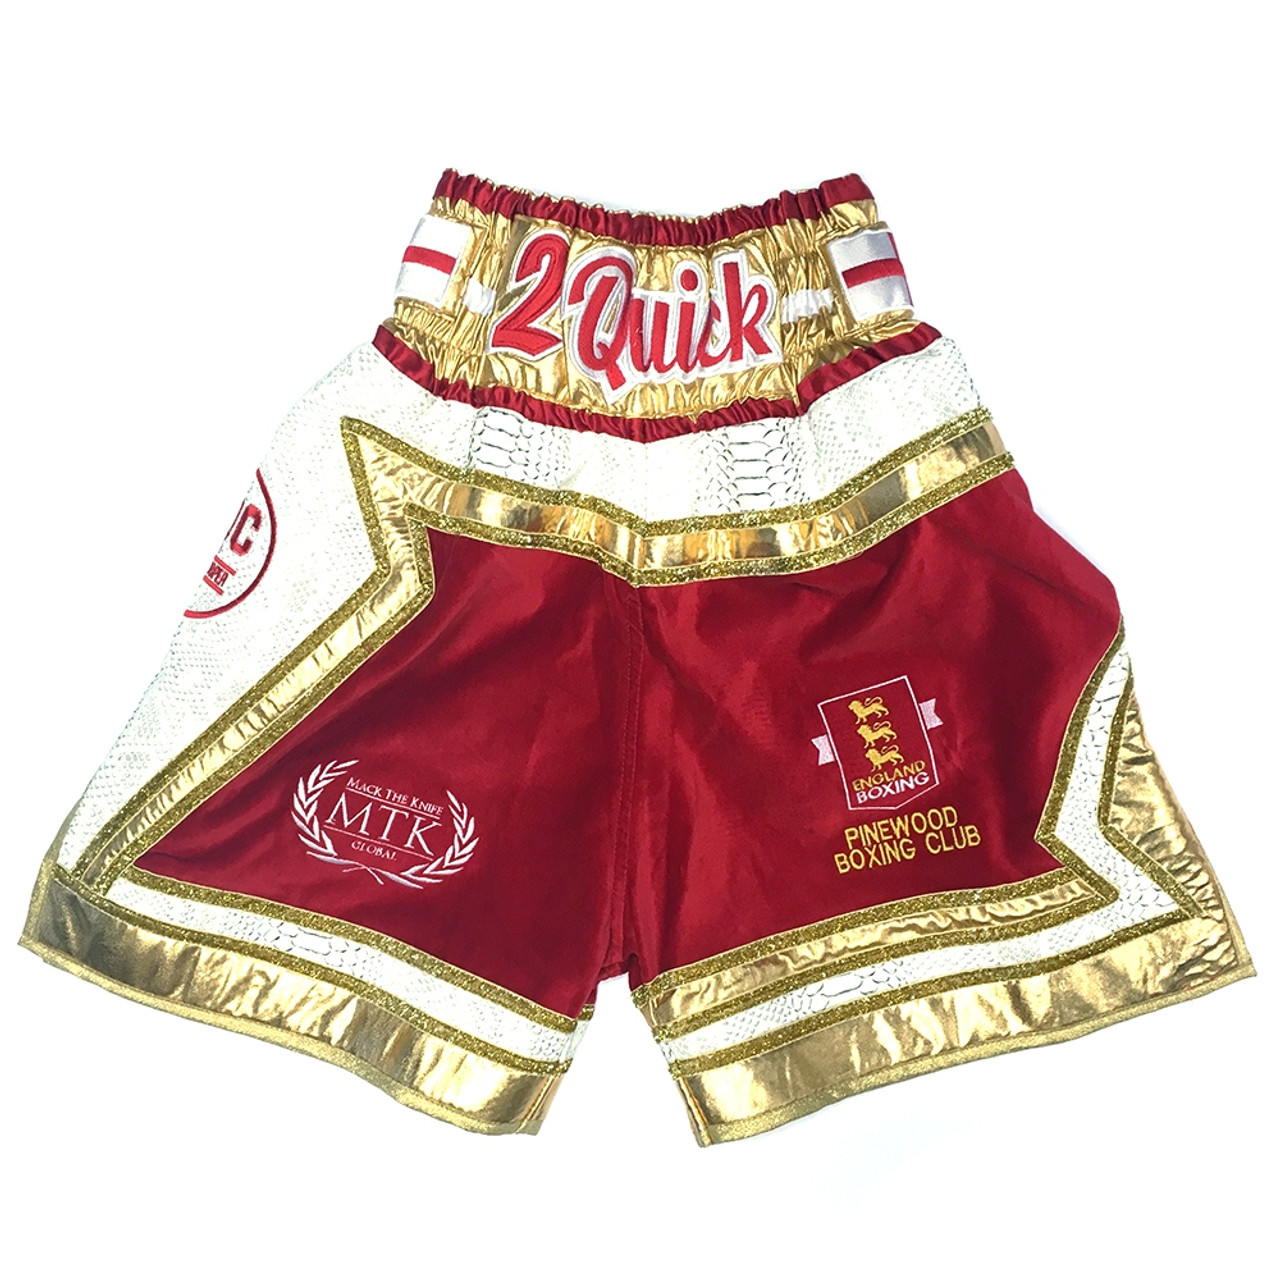 Saung Sialkot Industries  Kick Boxing Trousers Made by 100 Polyester  Satin fabric Custom design and logo welcome Please DM or email us at  infosaungsialkotindcom for your custom orders wwwsaungsialkotindcom  boxing fitness 